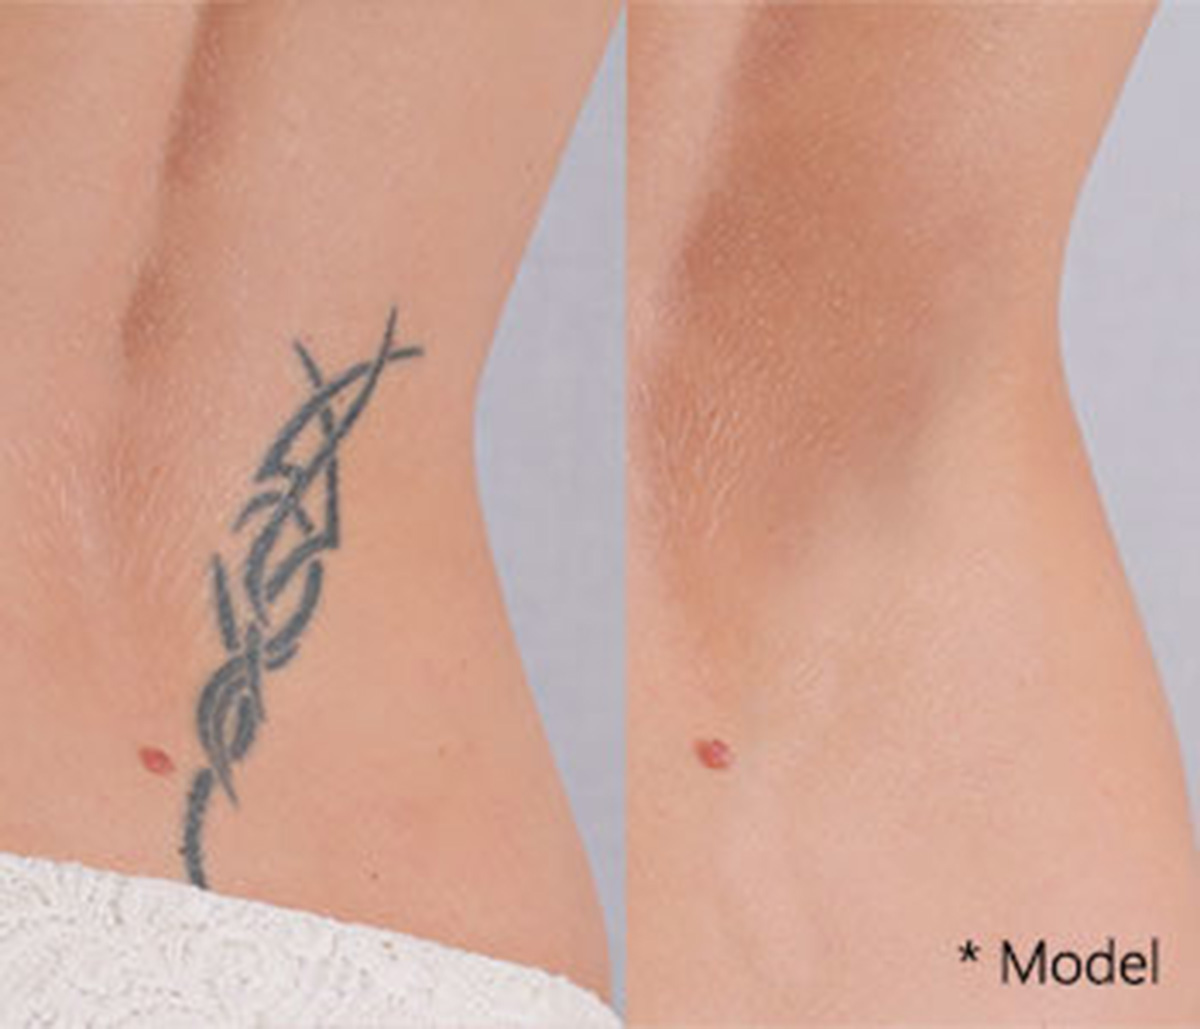 How to Start a Tattoo Removal Business | TRUiC